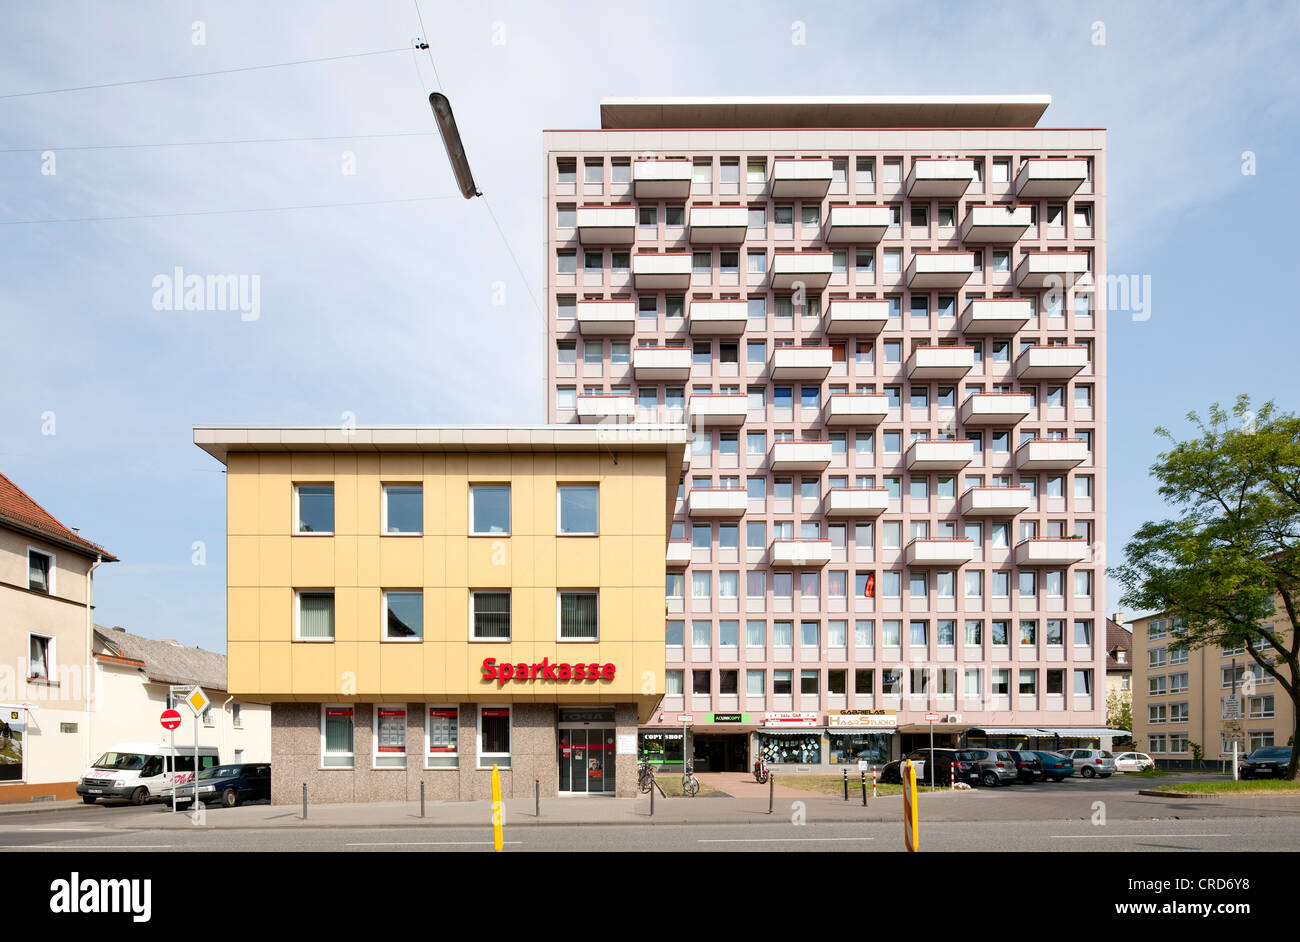 Residential high-rise, post-war architecture, Giessen, Hesse, Germany, Europe, PublicGround Stock Photo